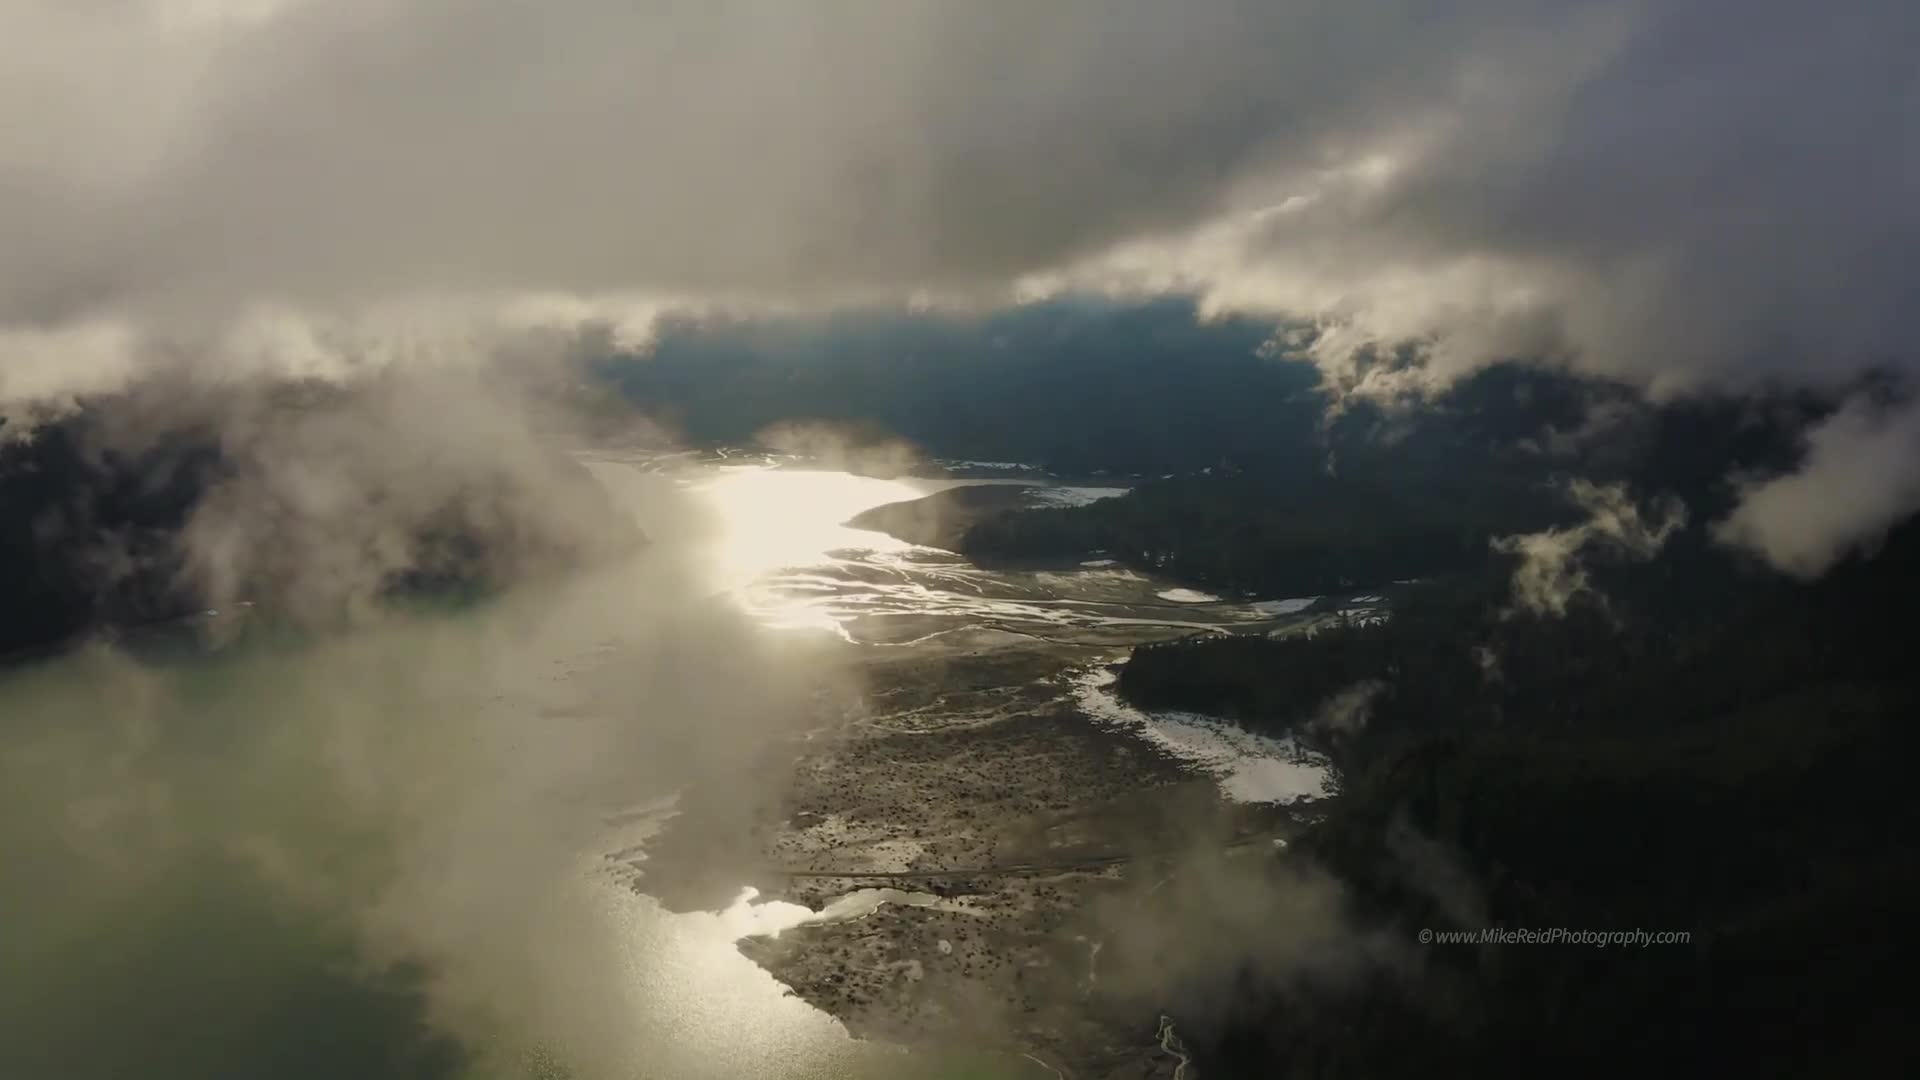 Baker Lake Through the Clouds